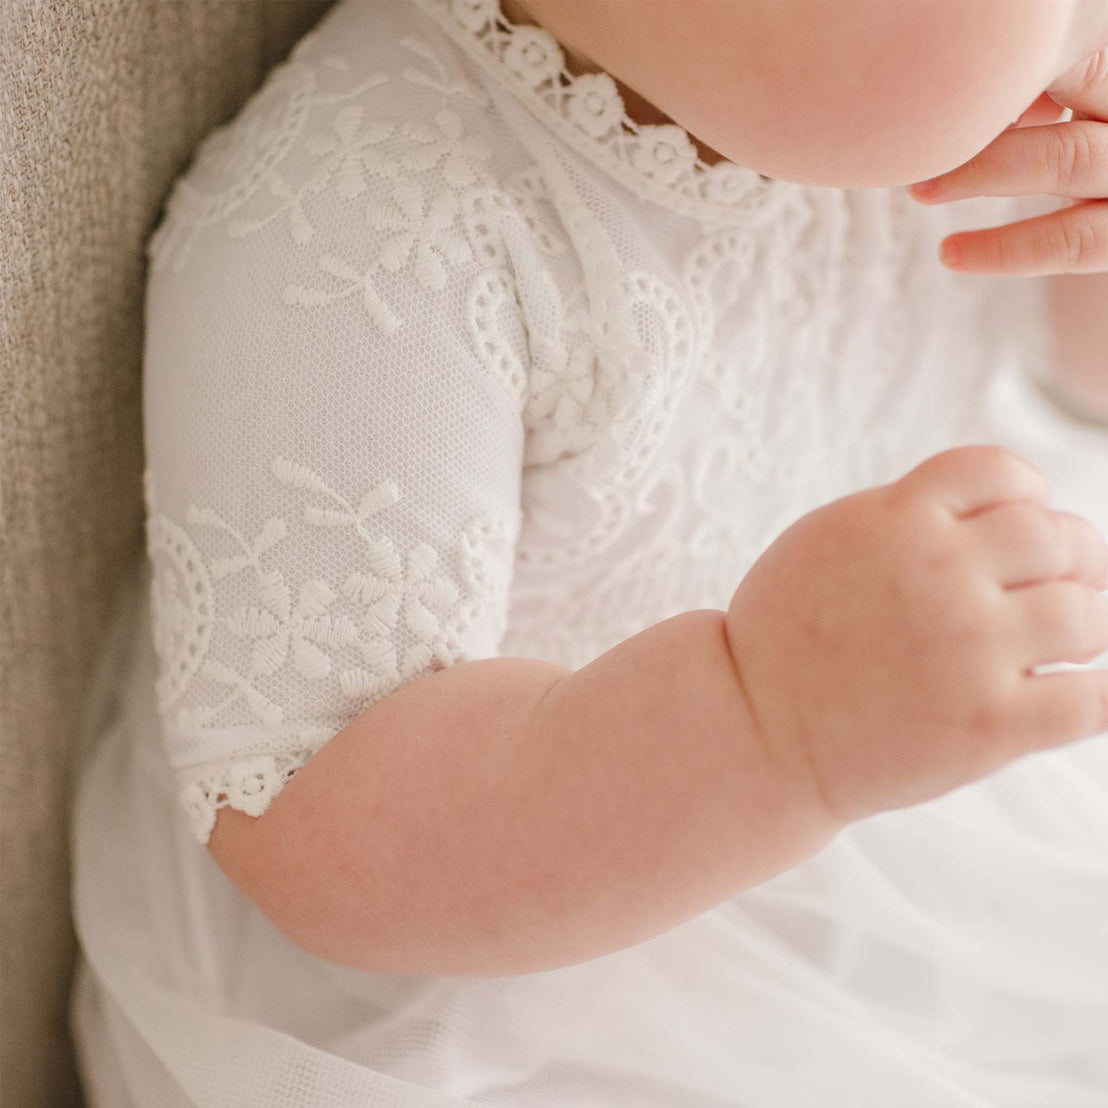 Close-up of a baby dressed in the Eliza Blessing Gown & Bonnet for a baptism, focusing on the delicate fabric details and the chubby arm of the infant against a soft background.